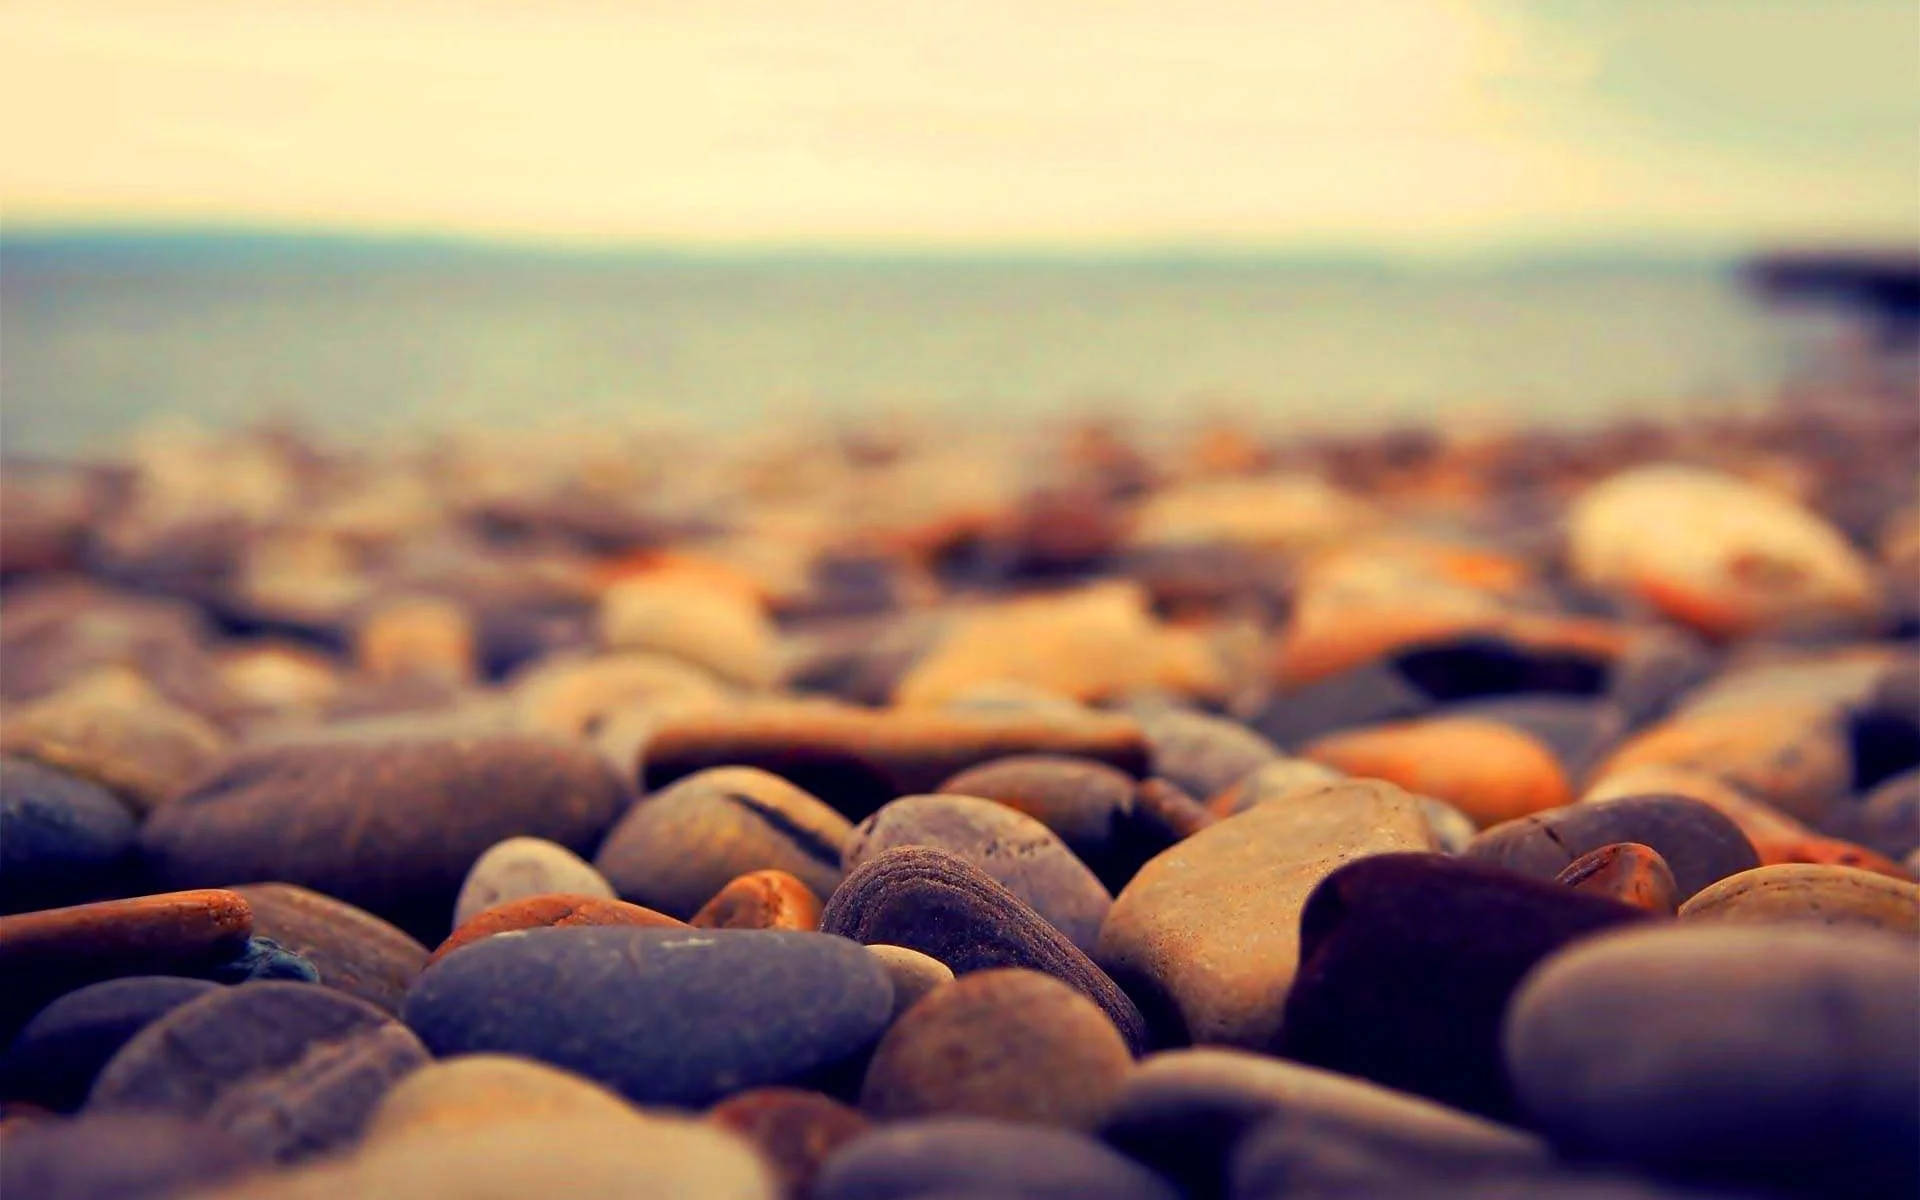 Hd Photography Of Rocks By The Beach Wallpaper